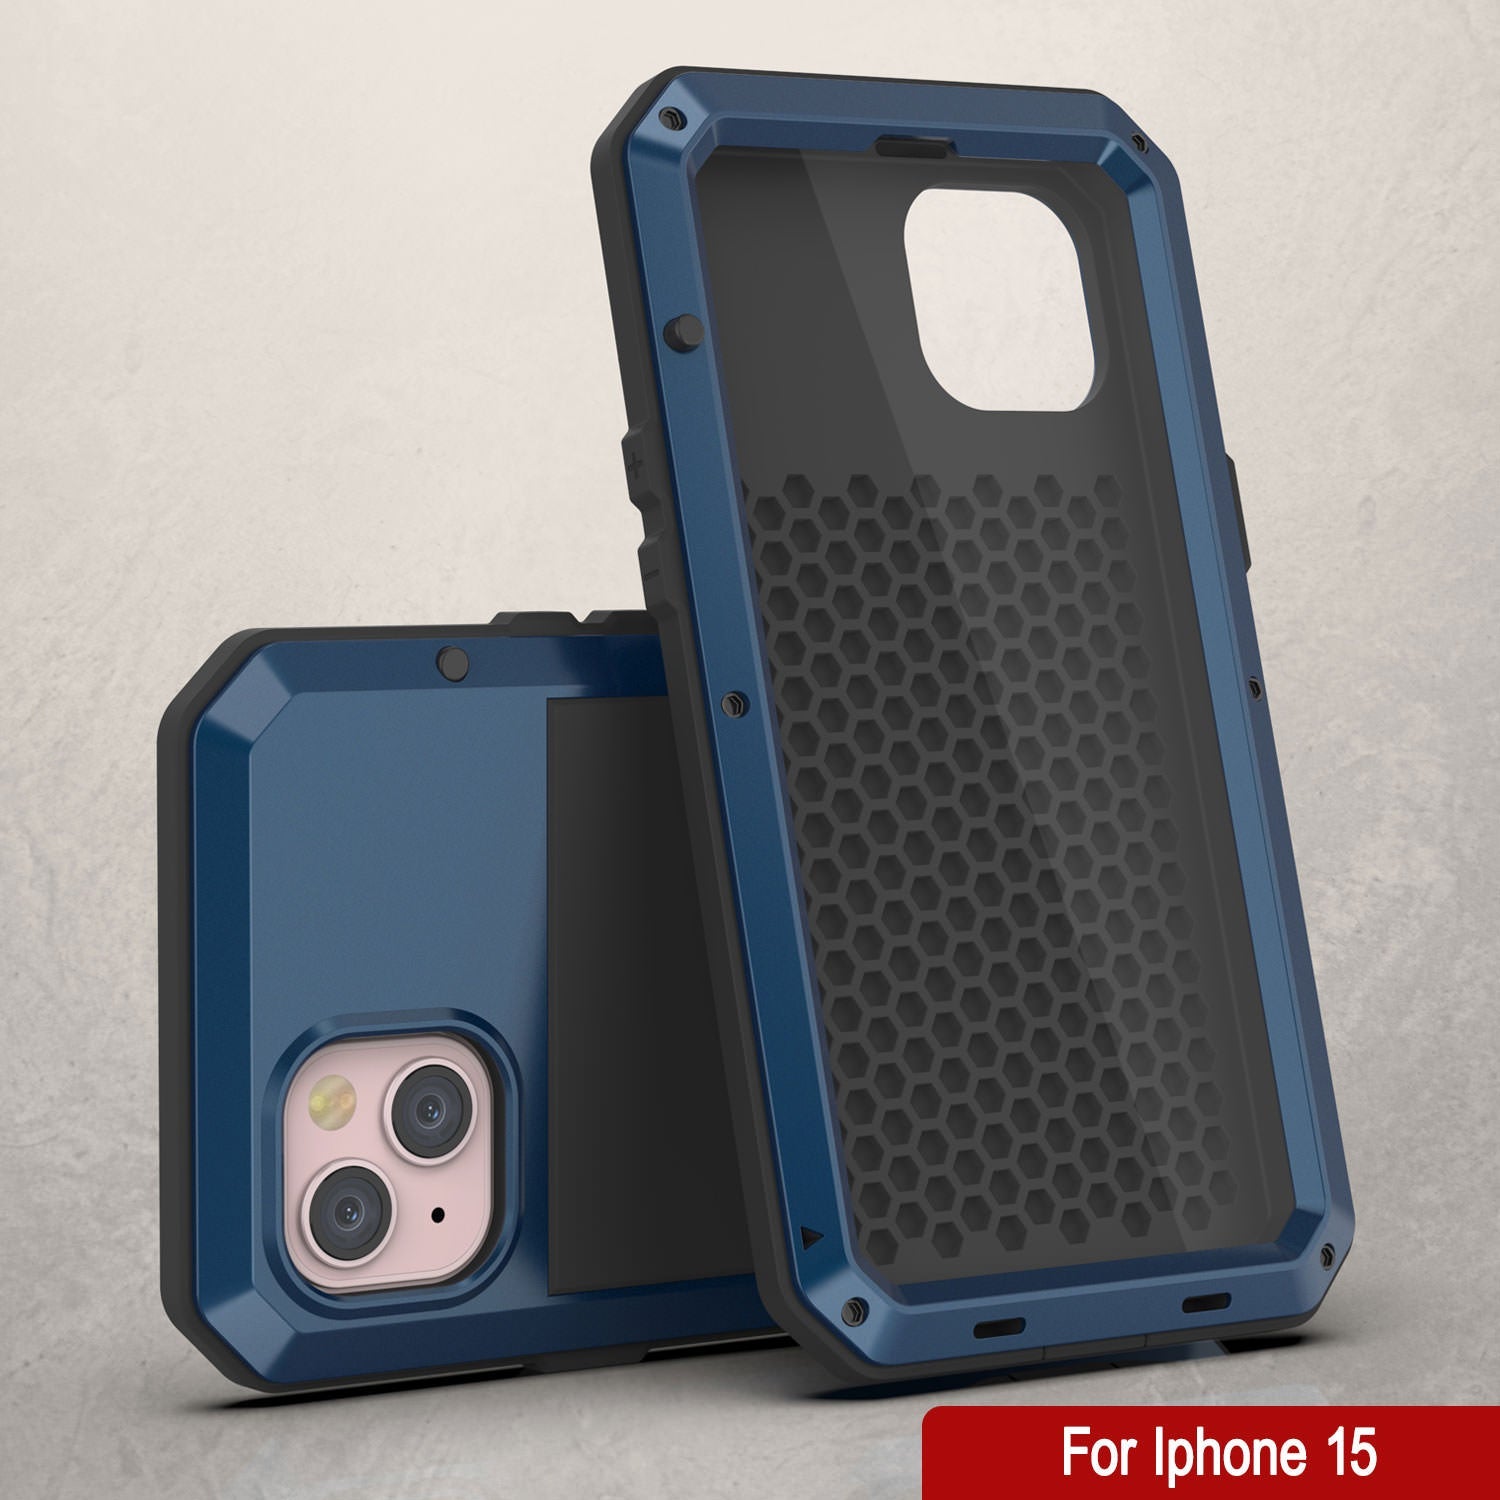 iPhone 15 Metal Case, Heavy Duty Military Grade Armor Cover [shock proof] Full Body Hard [Blue]